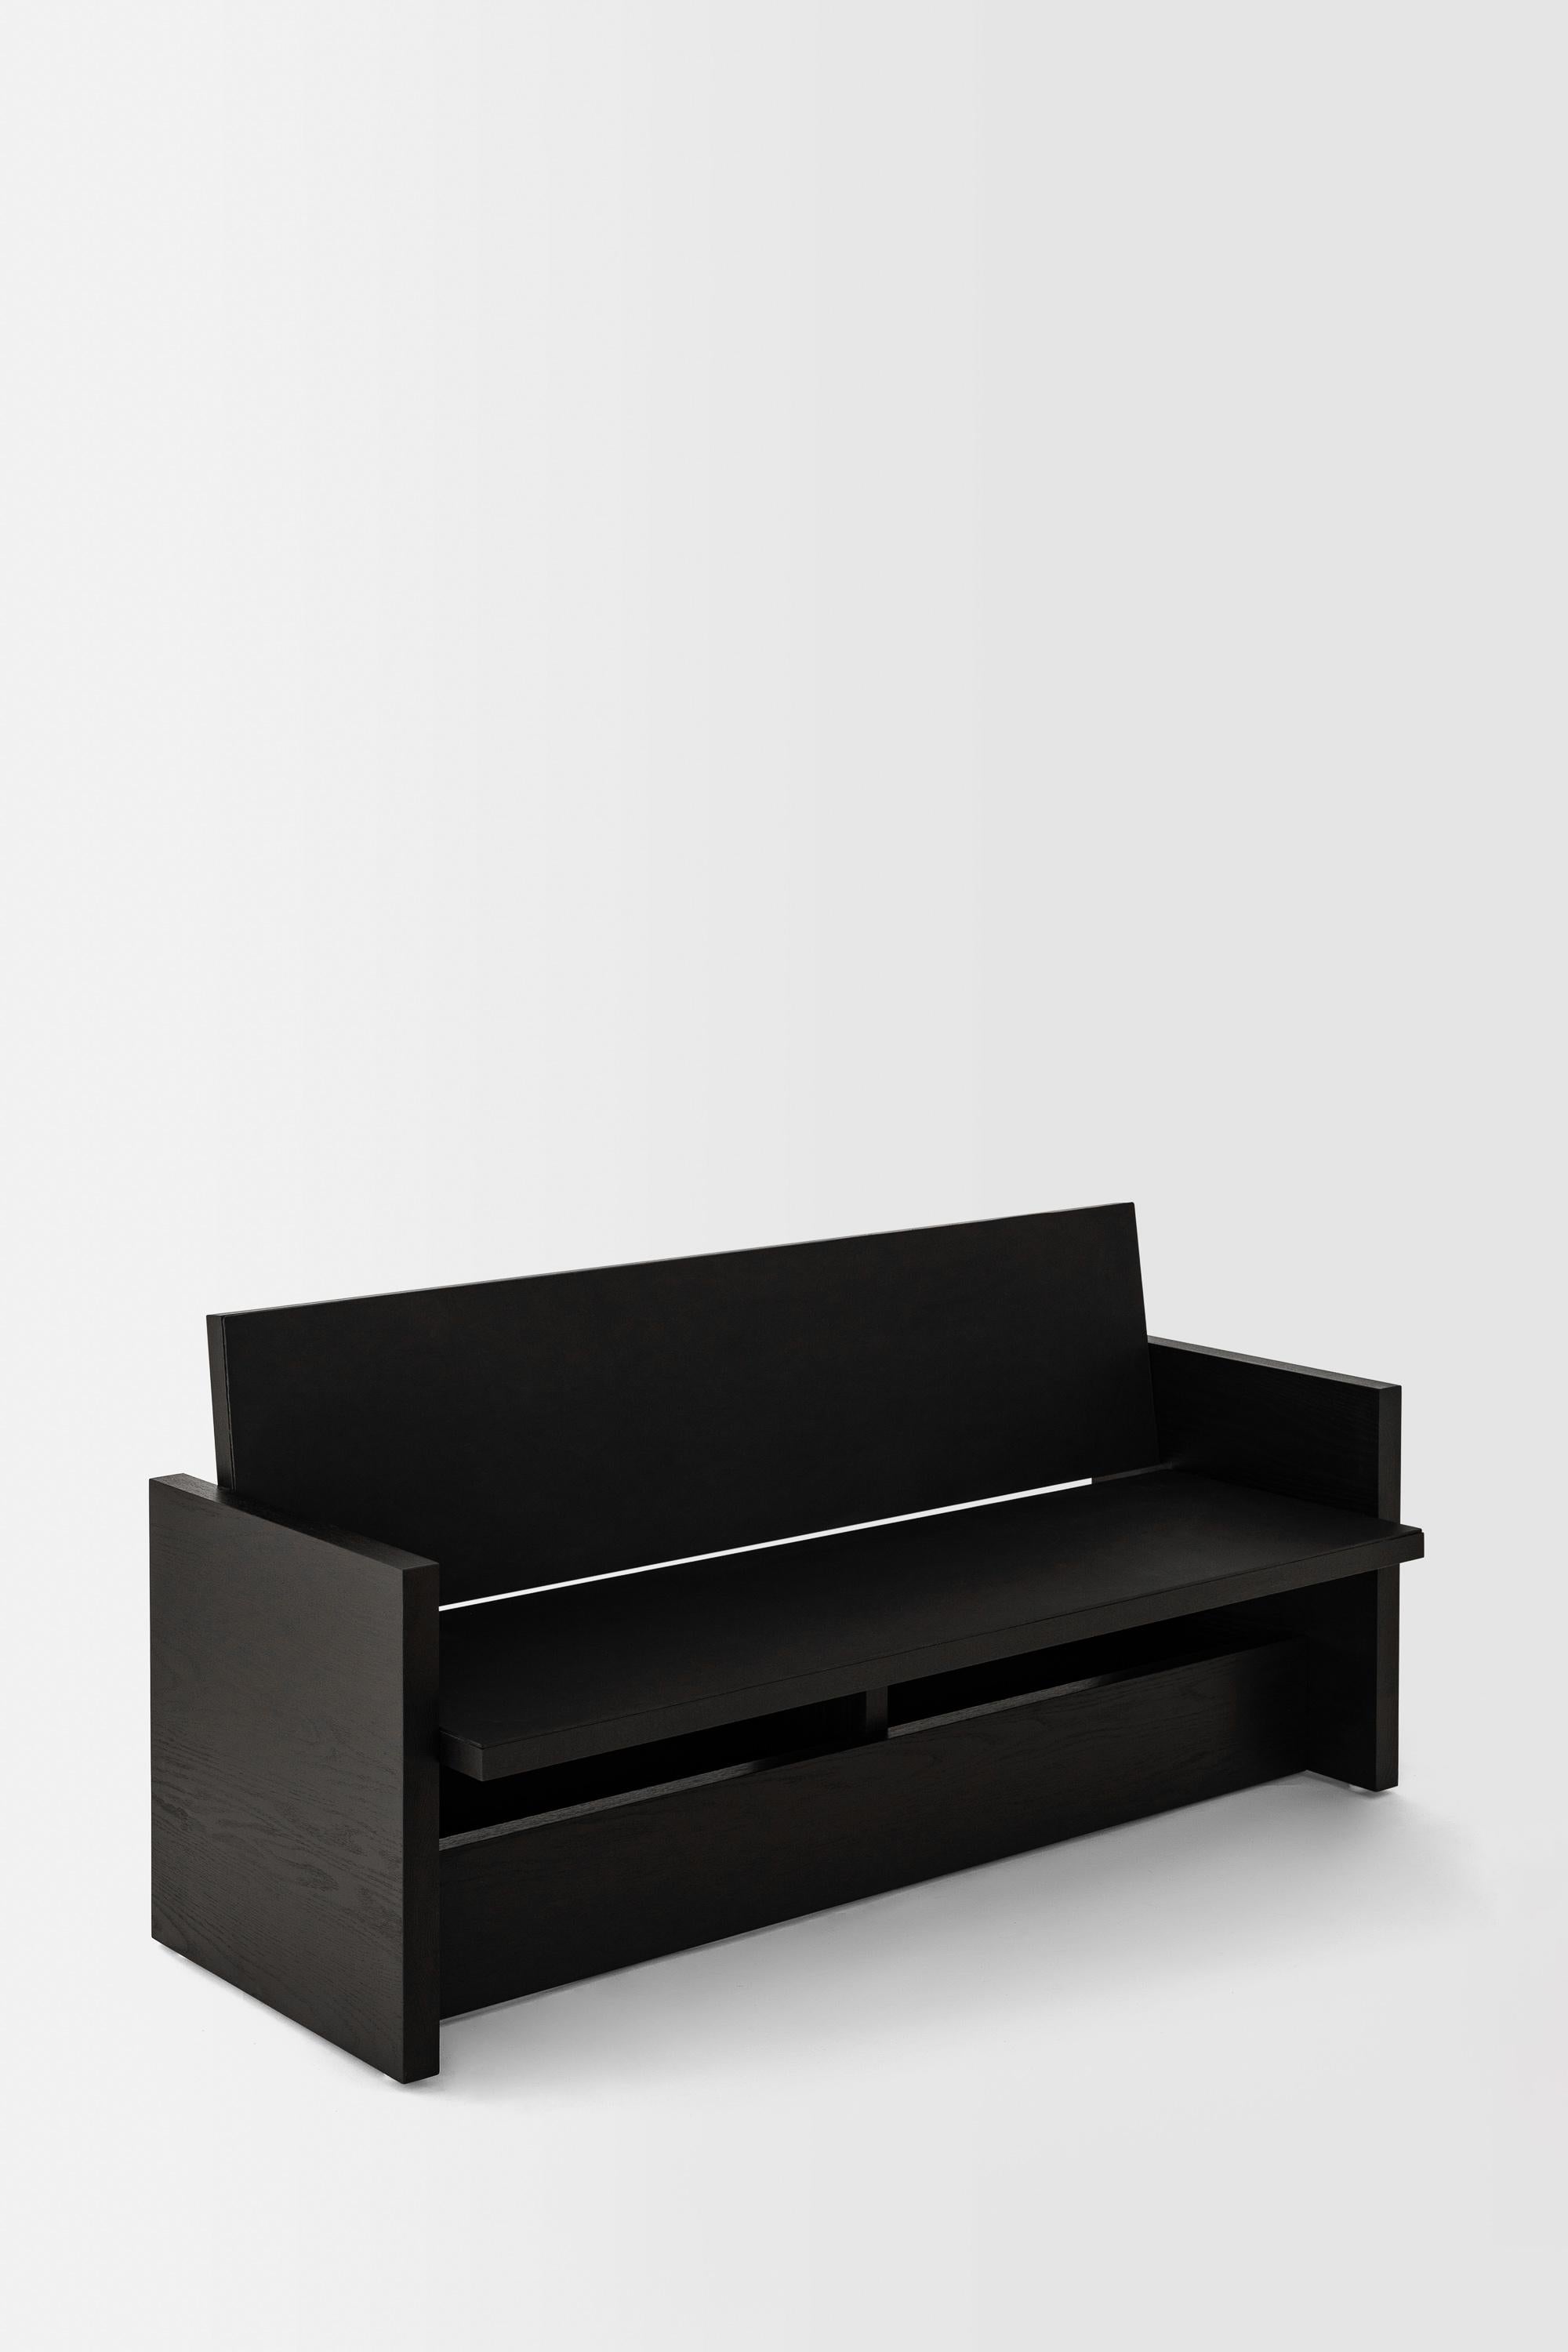 Mexican Clavijero Bench, Black Finished Oak Wood For Sale